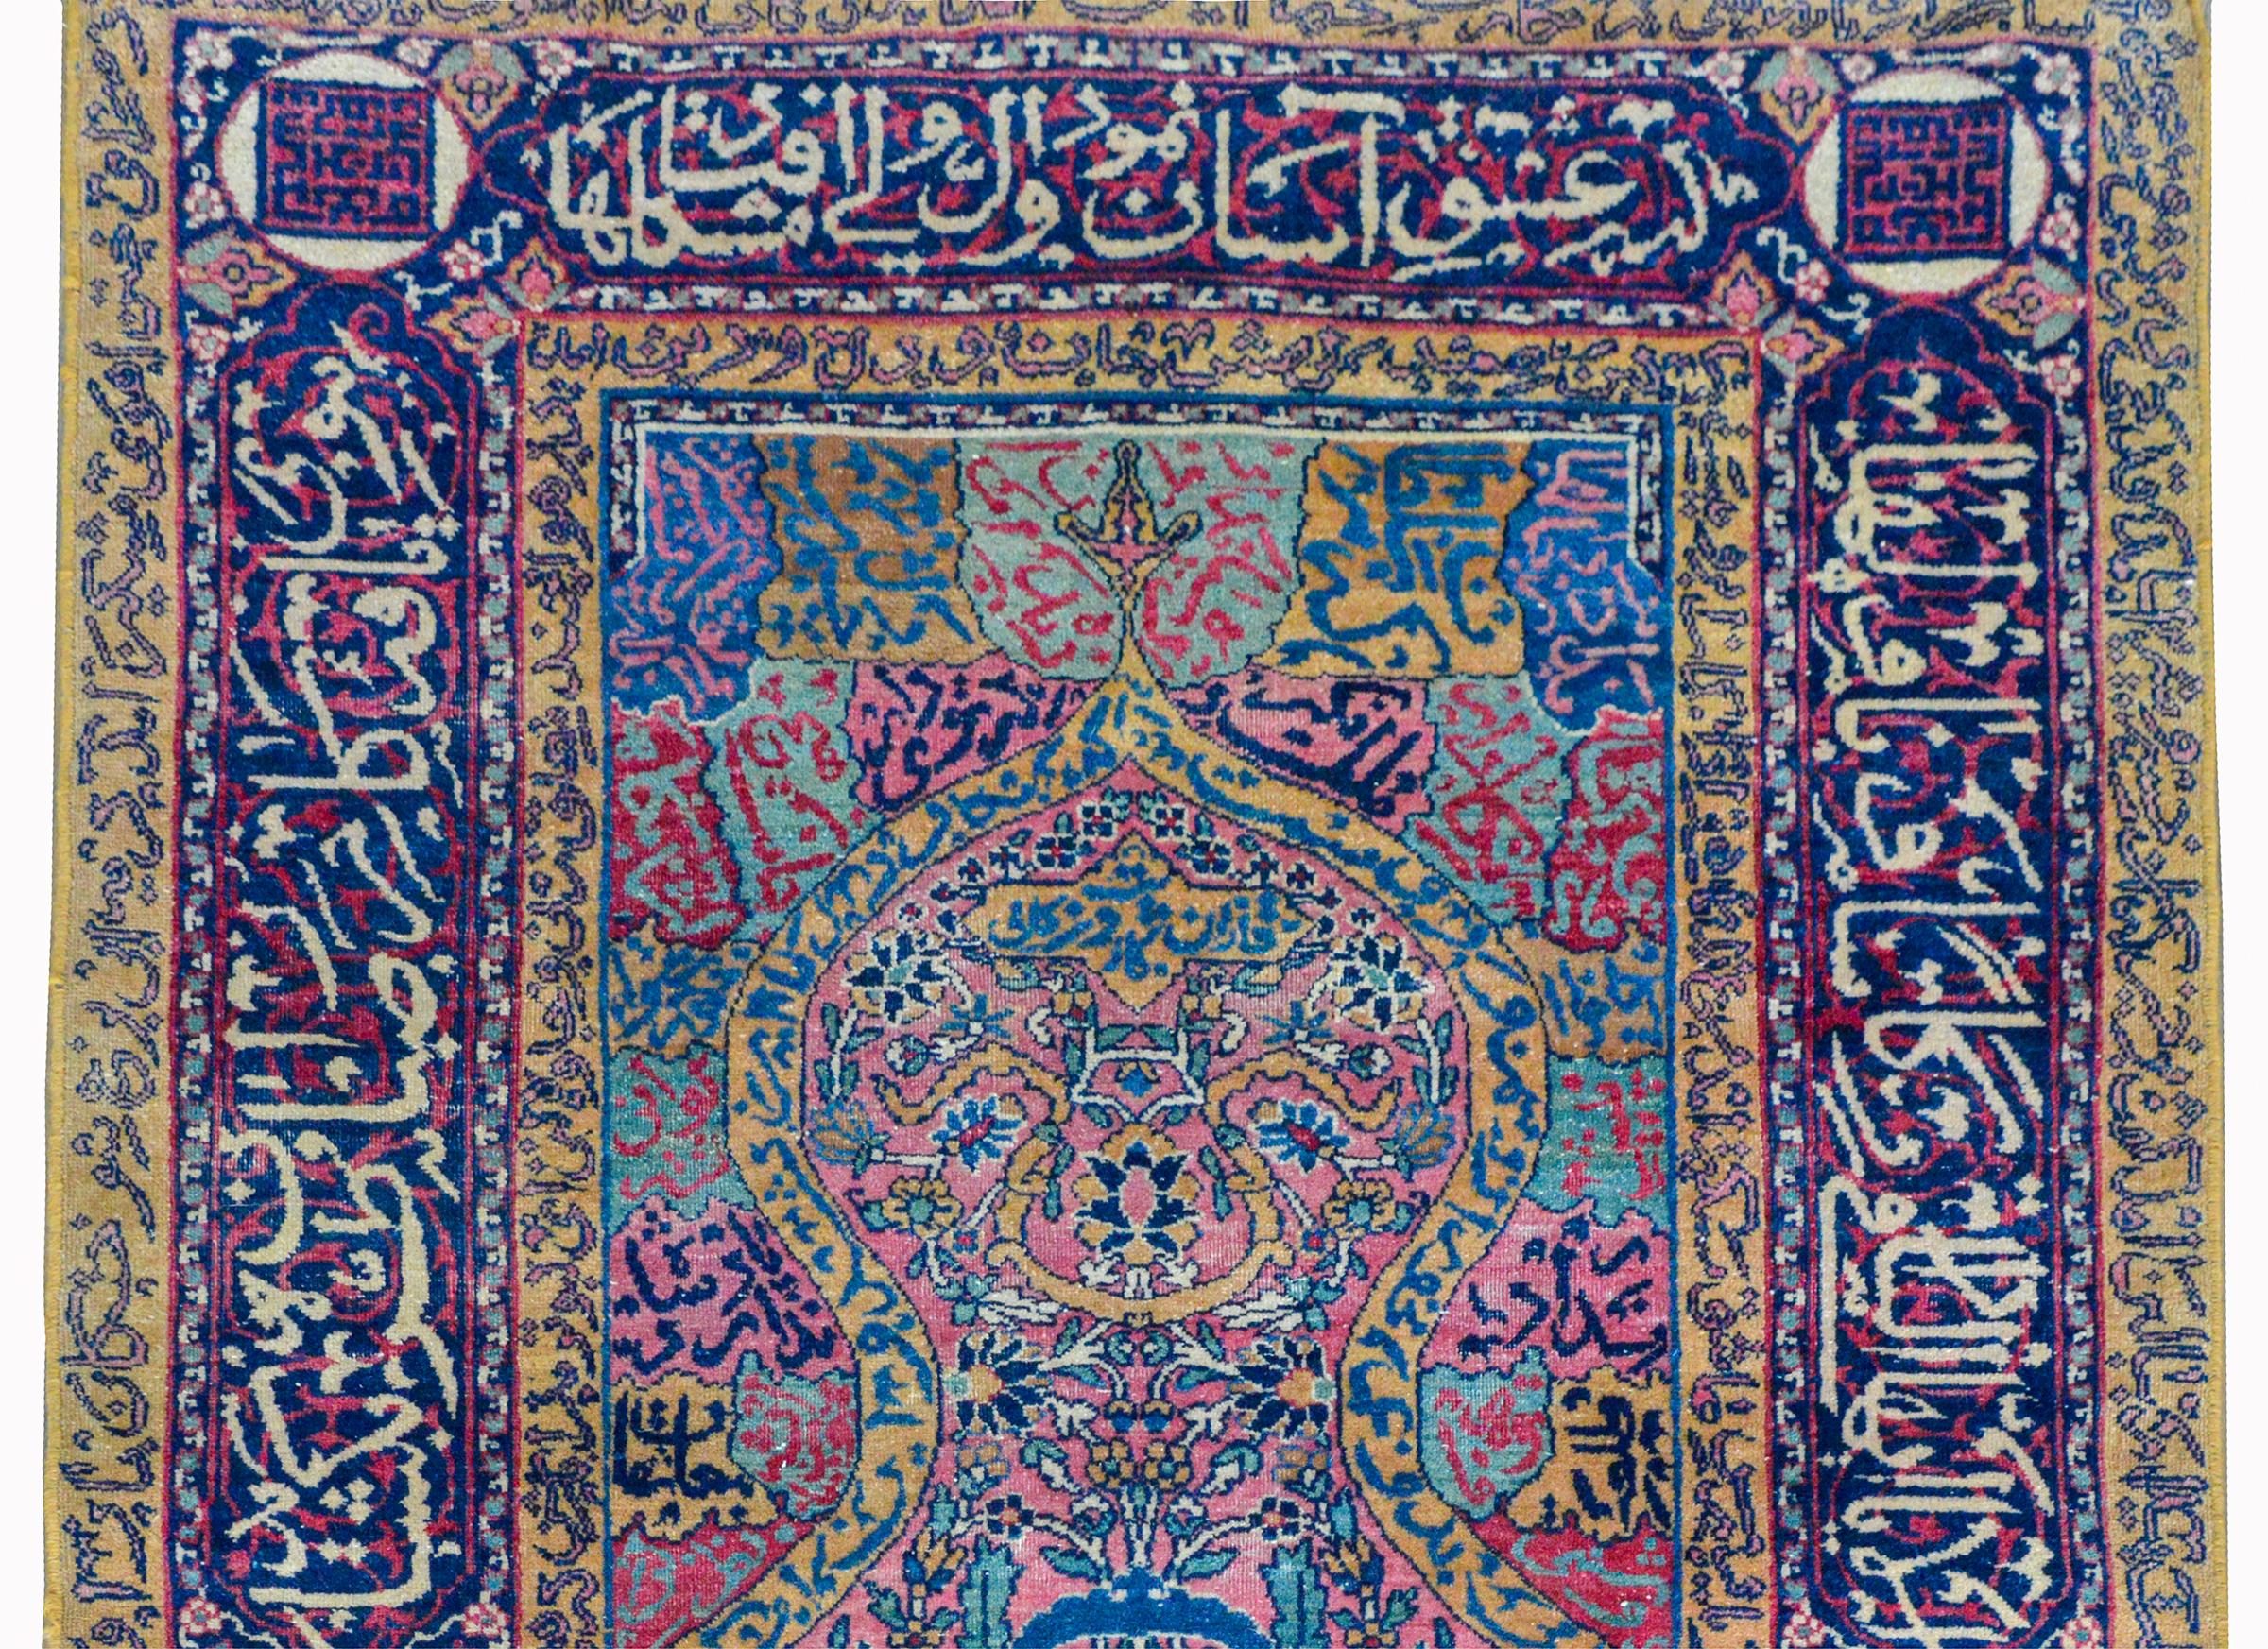 An extraordinary early 20th century Persian Kashan prayer rug with myriad floral and scrolling vine patterns woven in myriad colors, and surrounded by a border with scrolling vines and Persian script.